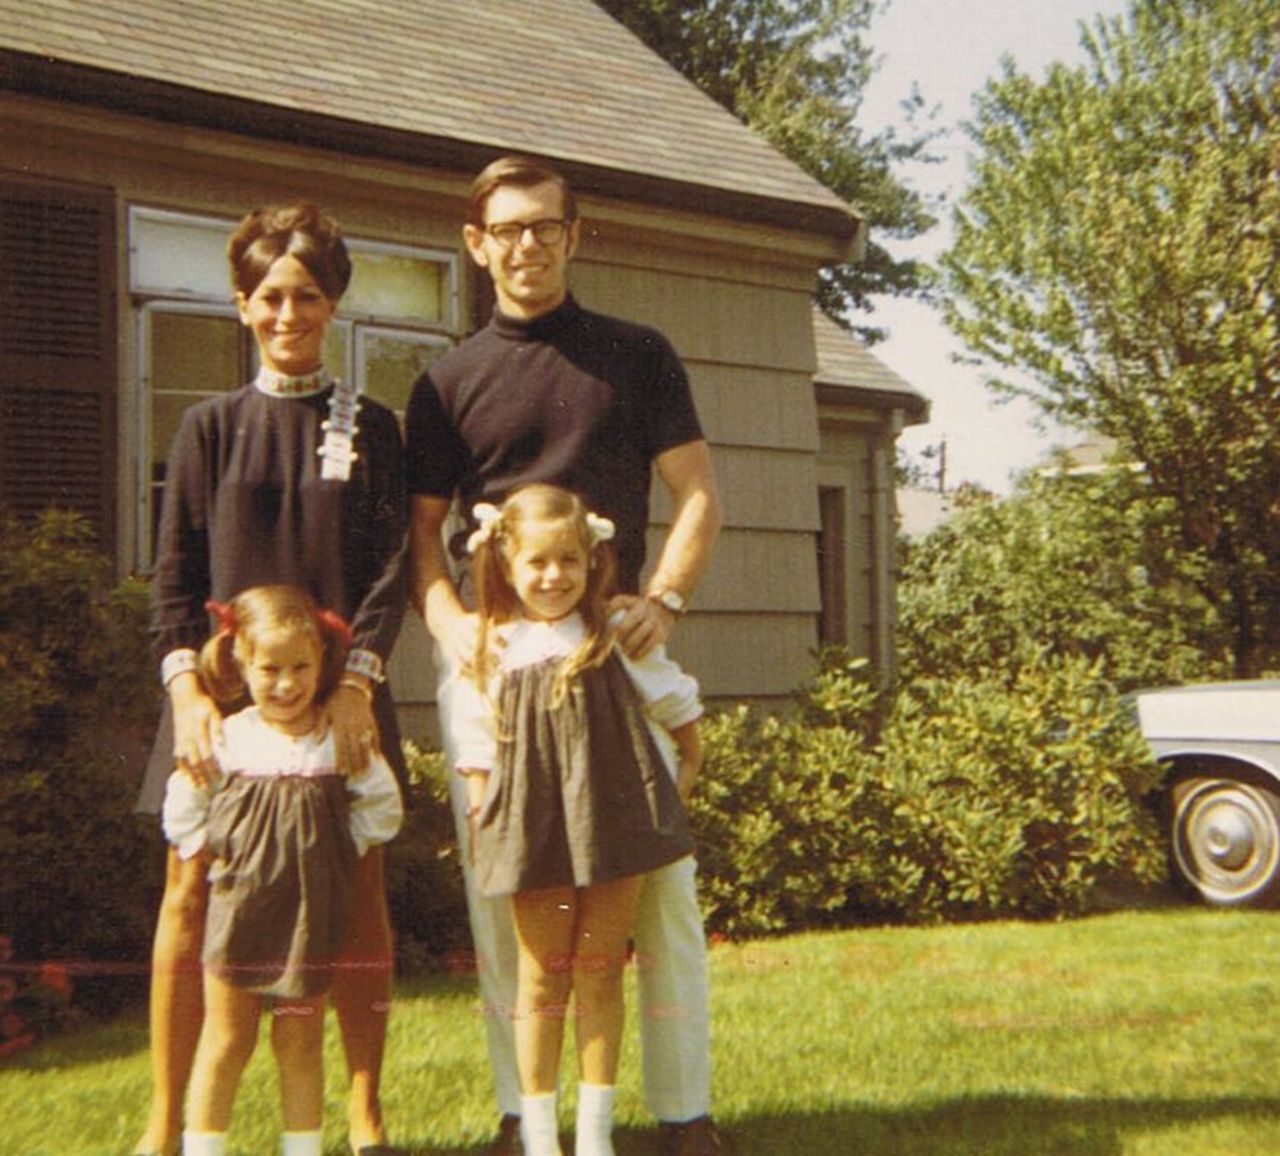 <a href="http://ireport.cnn.com/docs/DOC-1119779">Michelle Jones </a>stands with her sister and parents outside her grandparents' home in Newton, Massachusetts, in this 1968 photograph. "I loved the outfits my mom wore. Always the latest fashion. Big eyelashes and big makeup," she said.